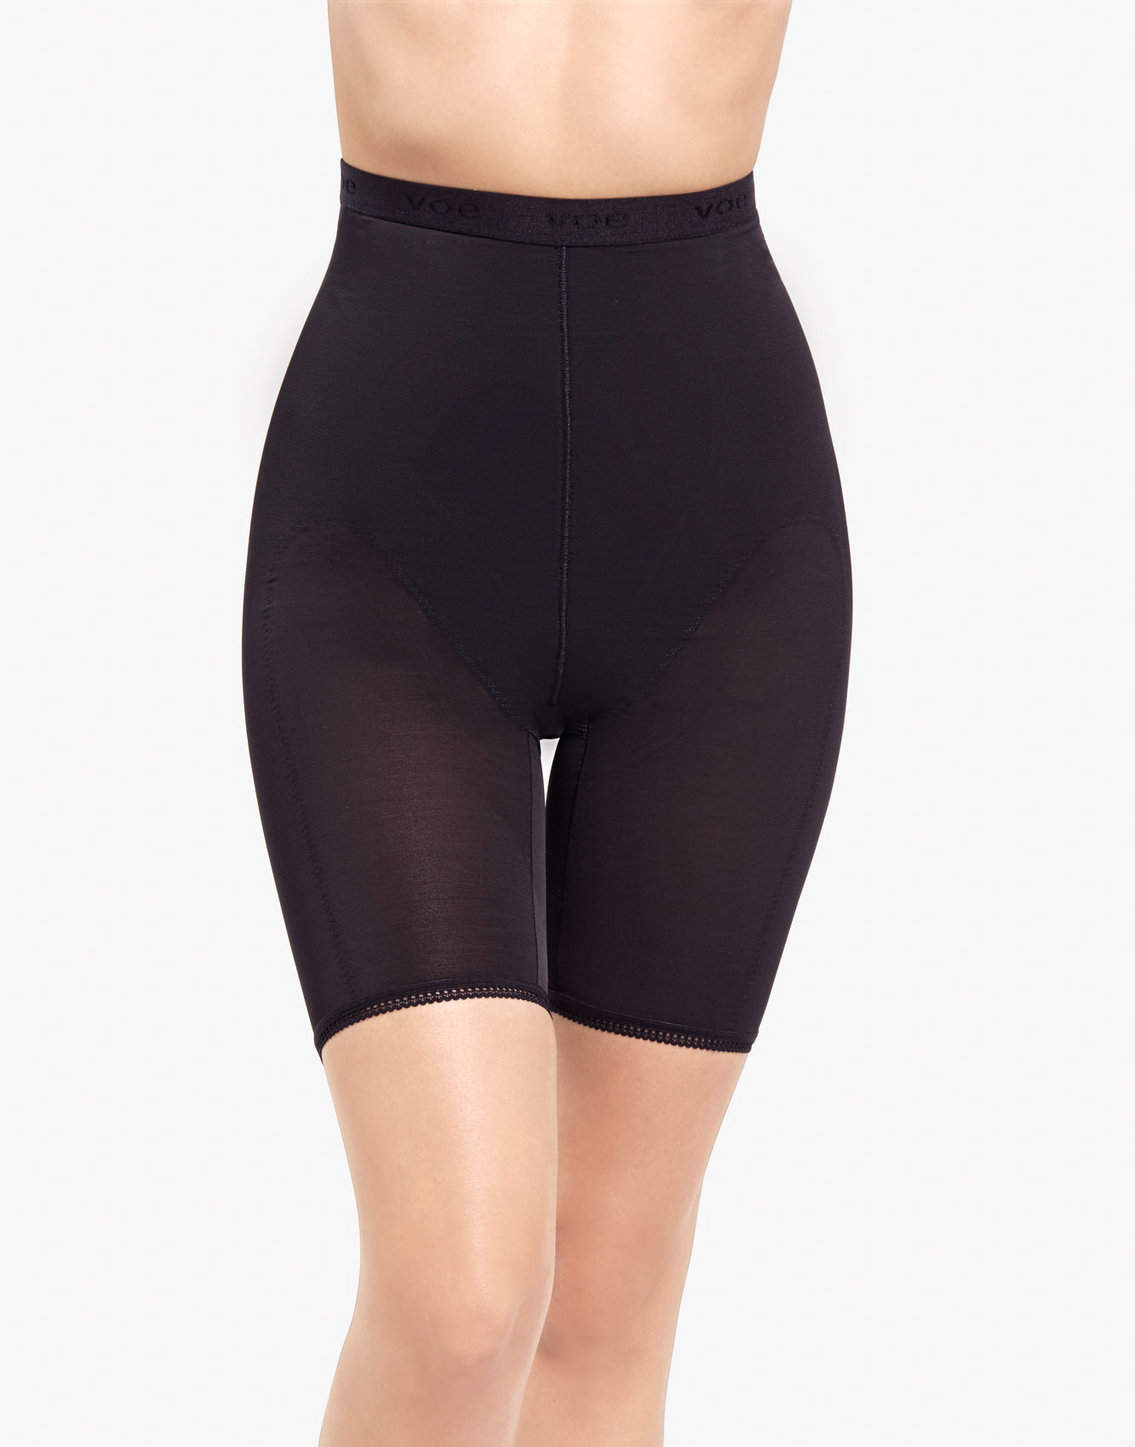 Buttock lifting high waisted girdle above the knee - delicat